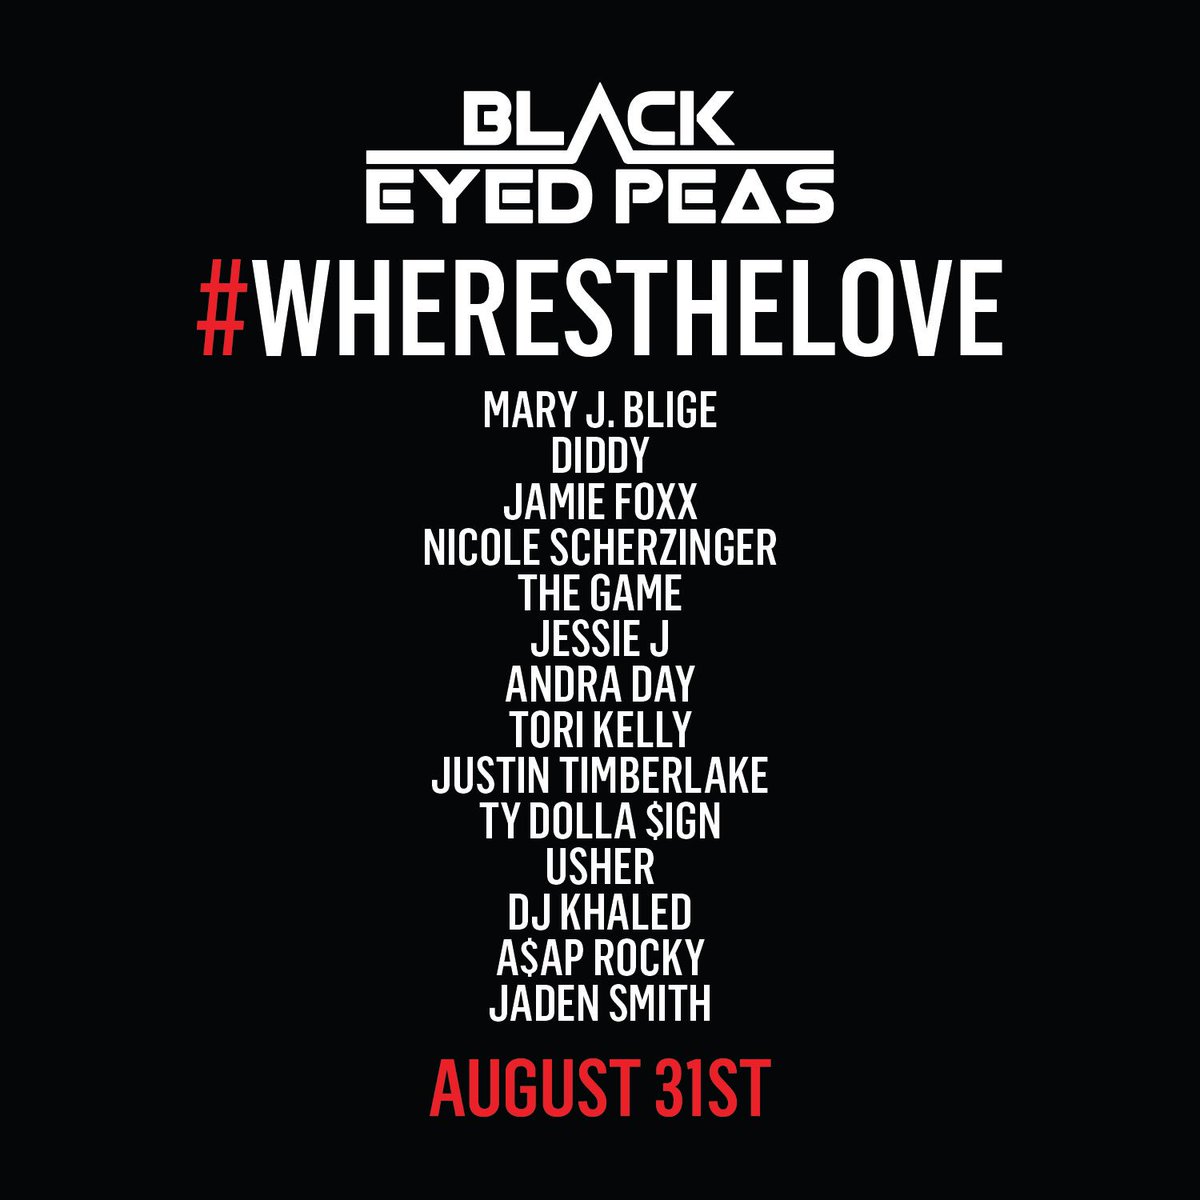 RT @iamwill: Let's spread love like the world is depending on it...
Because the world needs it right about now...
#WHEREStheLOVE https://t.…